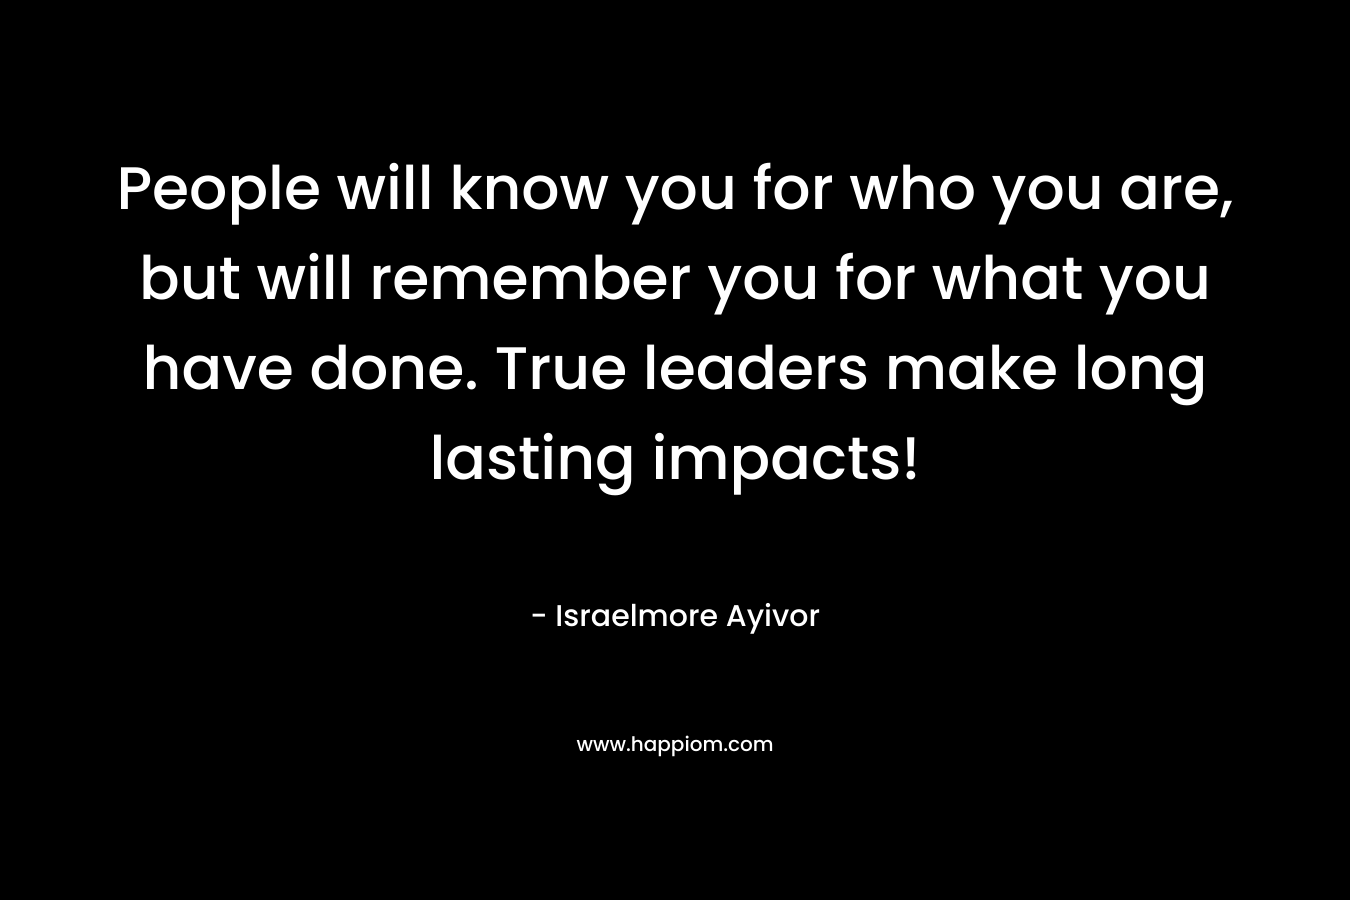 People will know you for who you are, but will remember you for what you have done. True leaders make long lasting impacts! – Israelmore Ayivor